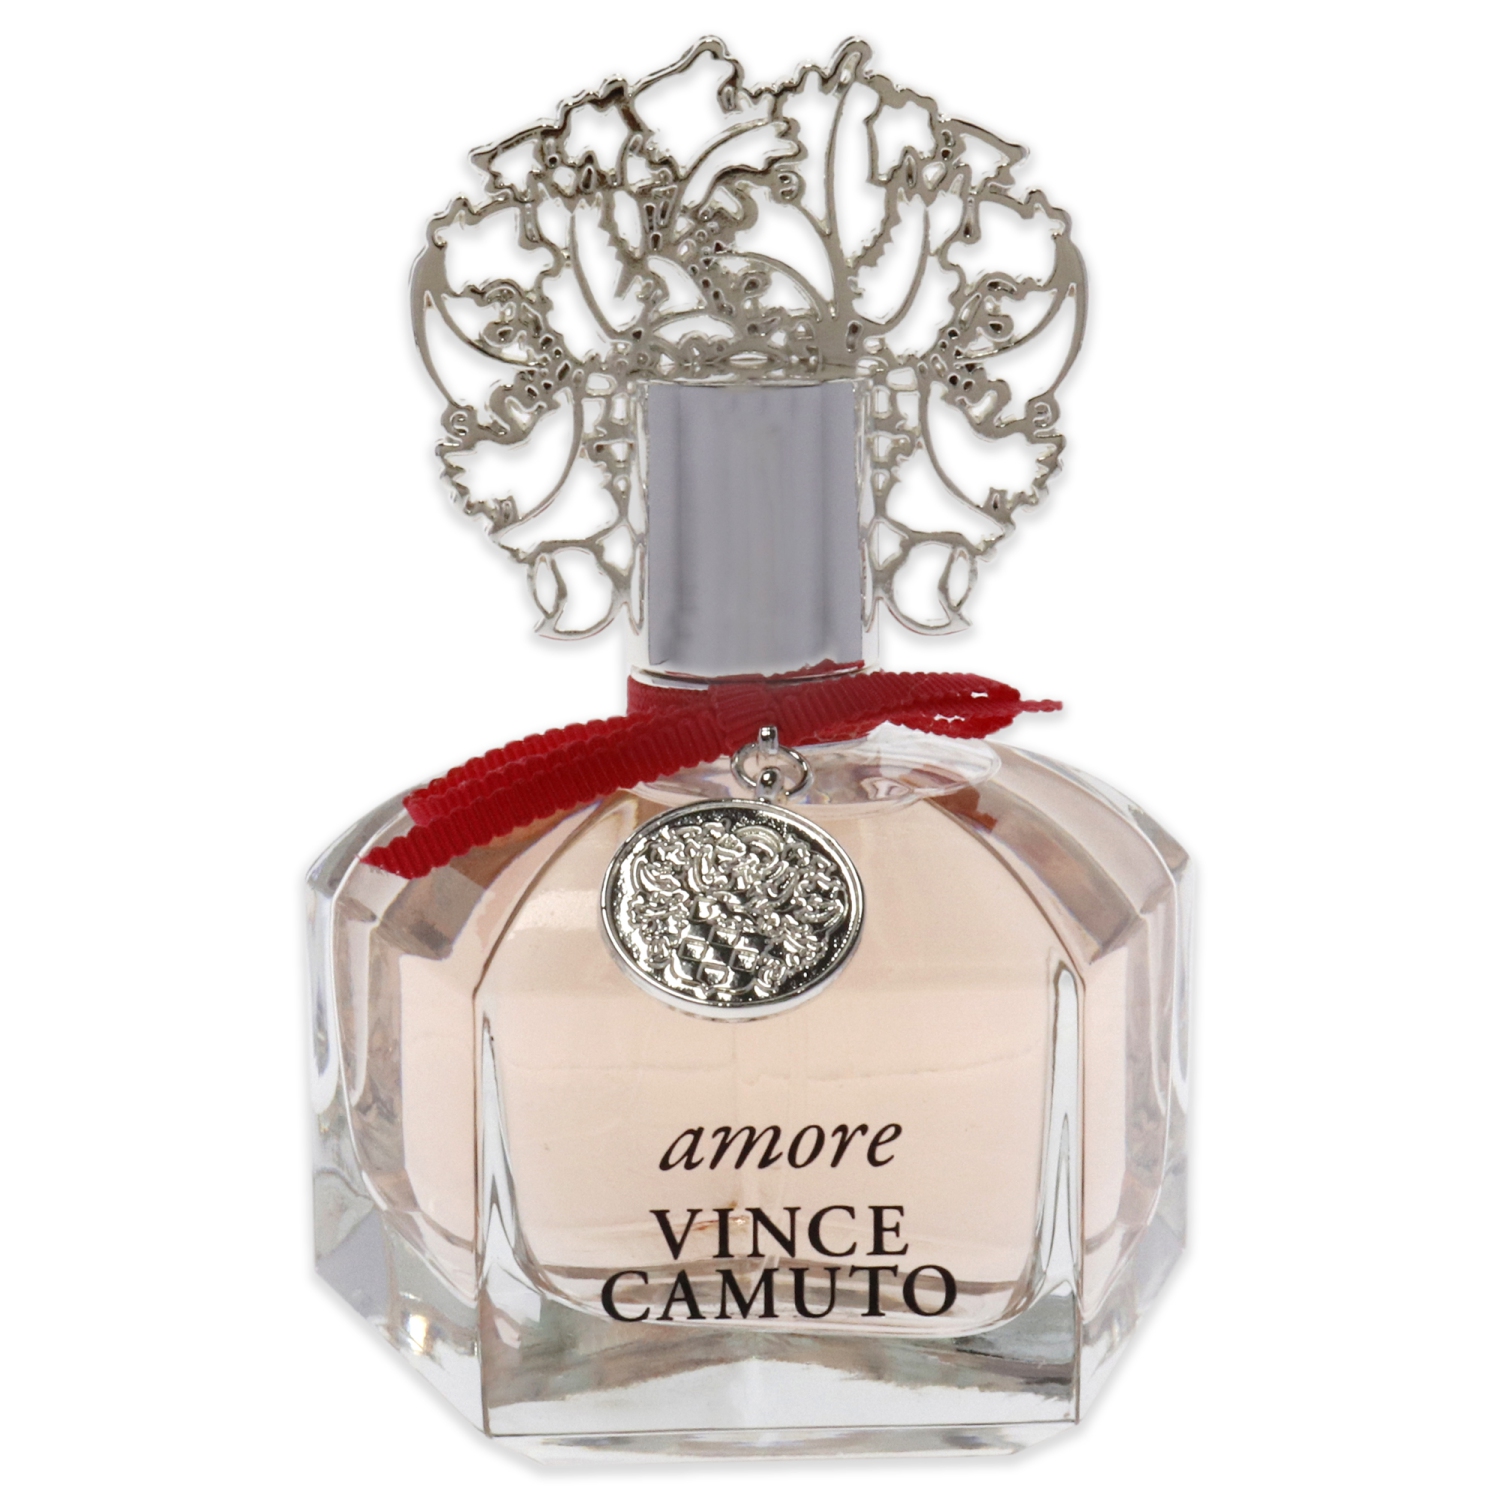 Vince camuto for Women - Amore EdP - The Scent Masters